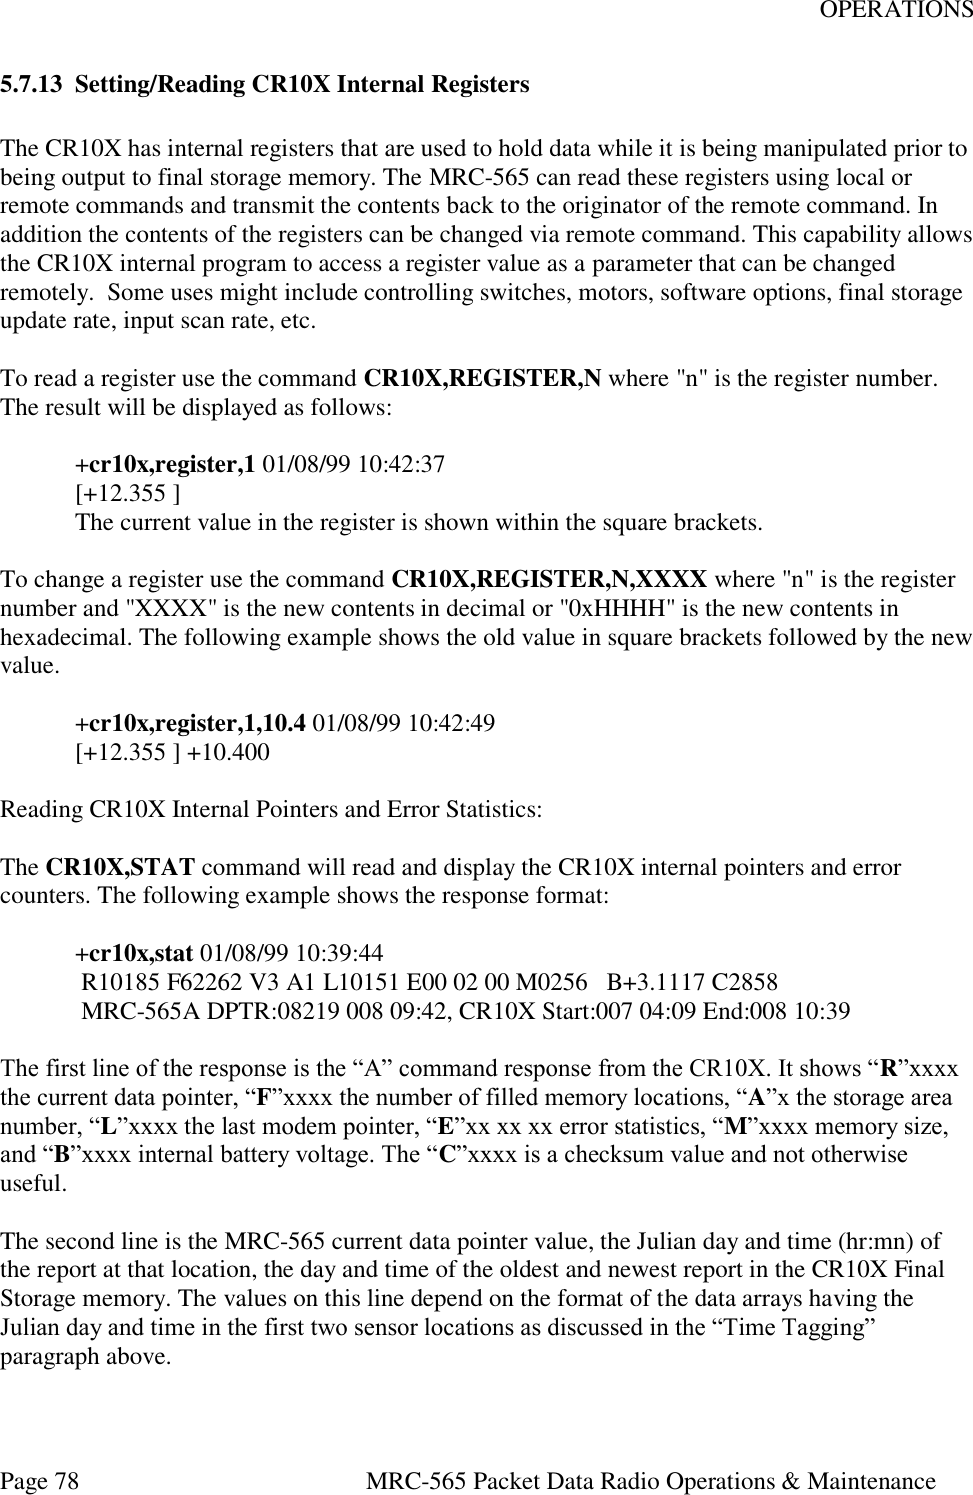 OPERATIONS Page 78  MRC-565 Packet Data Radio Operations &amp; Maintenance 5.7.13 Setting/Reading CR10X Internal Registers  The CR10X has internal registers that are used to hold data while it is being manipulated prior to being output to final storage memory. The MRC-565 can read these registers using local or remote commands and transmit the contents back to the originator of the remote command. In addition the contents of the registers can be changed via remote command. This capability allows the CR10X internal program to access a register value as a parameter that can be changed remotely.  Some uses might include controlling switches, motors, software options, final storage update rate, input scan rate, etc.  To read a register use the command CR10X,REGISTER,N where &quot;n&quot; is the register number. The result will be displayed as follows:  +cr10x,register,1 01/08/99 10:42:37 [+12.355 ] The current value in the register is shown within the square brackets.  To change a register use the command CR10X,REGISTER,N,XXXX where &quot;n&quot; is the register number and &quot;XXXX&quot; is the new contents in decimal or &quot;0xHHHH&quot; is the new contents in hexadecimal. The following example shows the old value in square brackets followed by the new value.   +cr10x,register,1,10.4 01/08/99 10:42:49 [+12.355 ] +10.400  Reading CR10X Internal Pointers and Error Statistics:  The CR10X,STAT command will read and display the CR10X internal pointers and error counters. The following example shows the response format:  +cr10x,stat 01/08/99 10:39:44  R10185 F62262 V3 A1 L10151 E00 02 00 M0256   B+3.1117 C2858    MRC-565A DPTR:08219 008 09:42, CR10X Start:007 04:09 End:008 10:39  The first line of the response is the “A” command response from the CR10X. It shows “R”xxxx the current data pointer, “F”xxxx the number of filled memory locations, “A”x the storage area number, “L”xxxx the last modem pointer, “E”xx xx xx error statistics, “M”xxxx memory size, and “B”xxxx internal battery voltage. The “C”xxxx is a checksum value and not otherwise useful.   The second line is the MRC-565 current data pointer value, the Julian day and time (hr:mn) of the report at that location, the day and time of the oldest and newest report in the CR10X Final Storage memory. The values on this line depend on the format of the data arrays having the Julian day and time in the first two sensor locations as discussed in the “Time Tagging” paragraph above.   